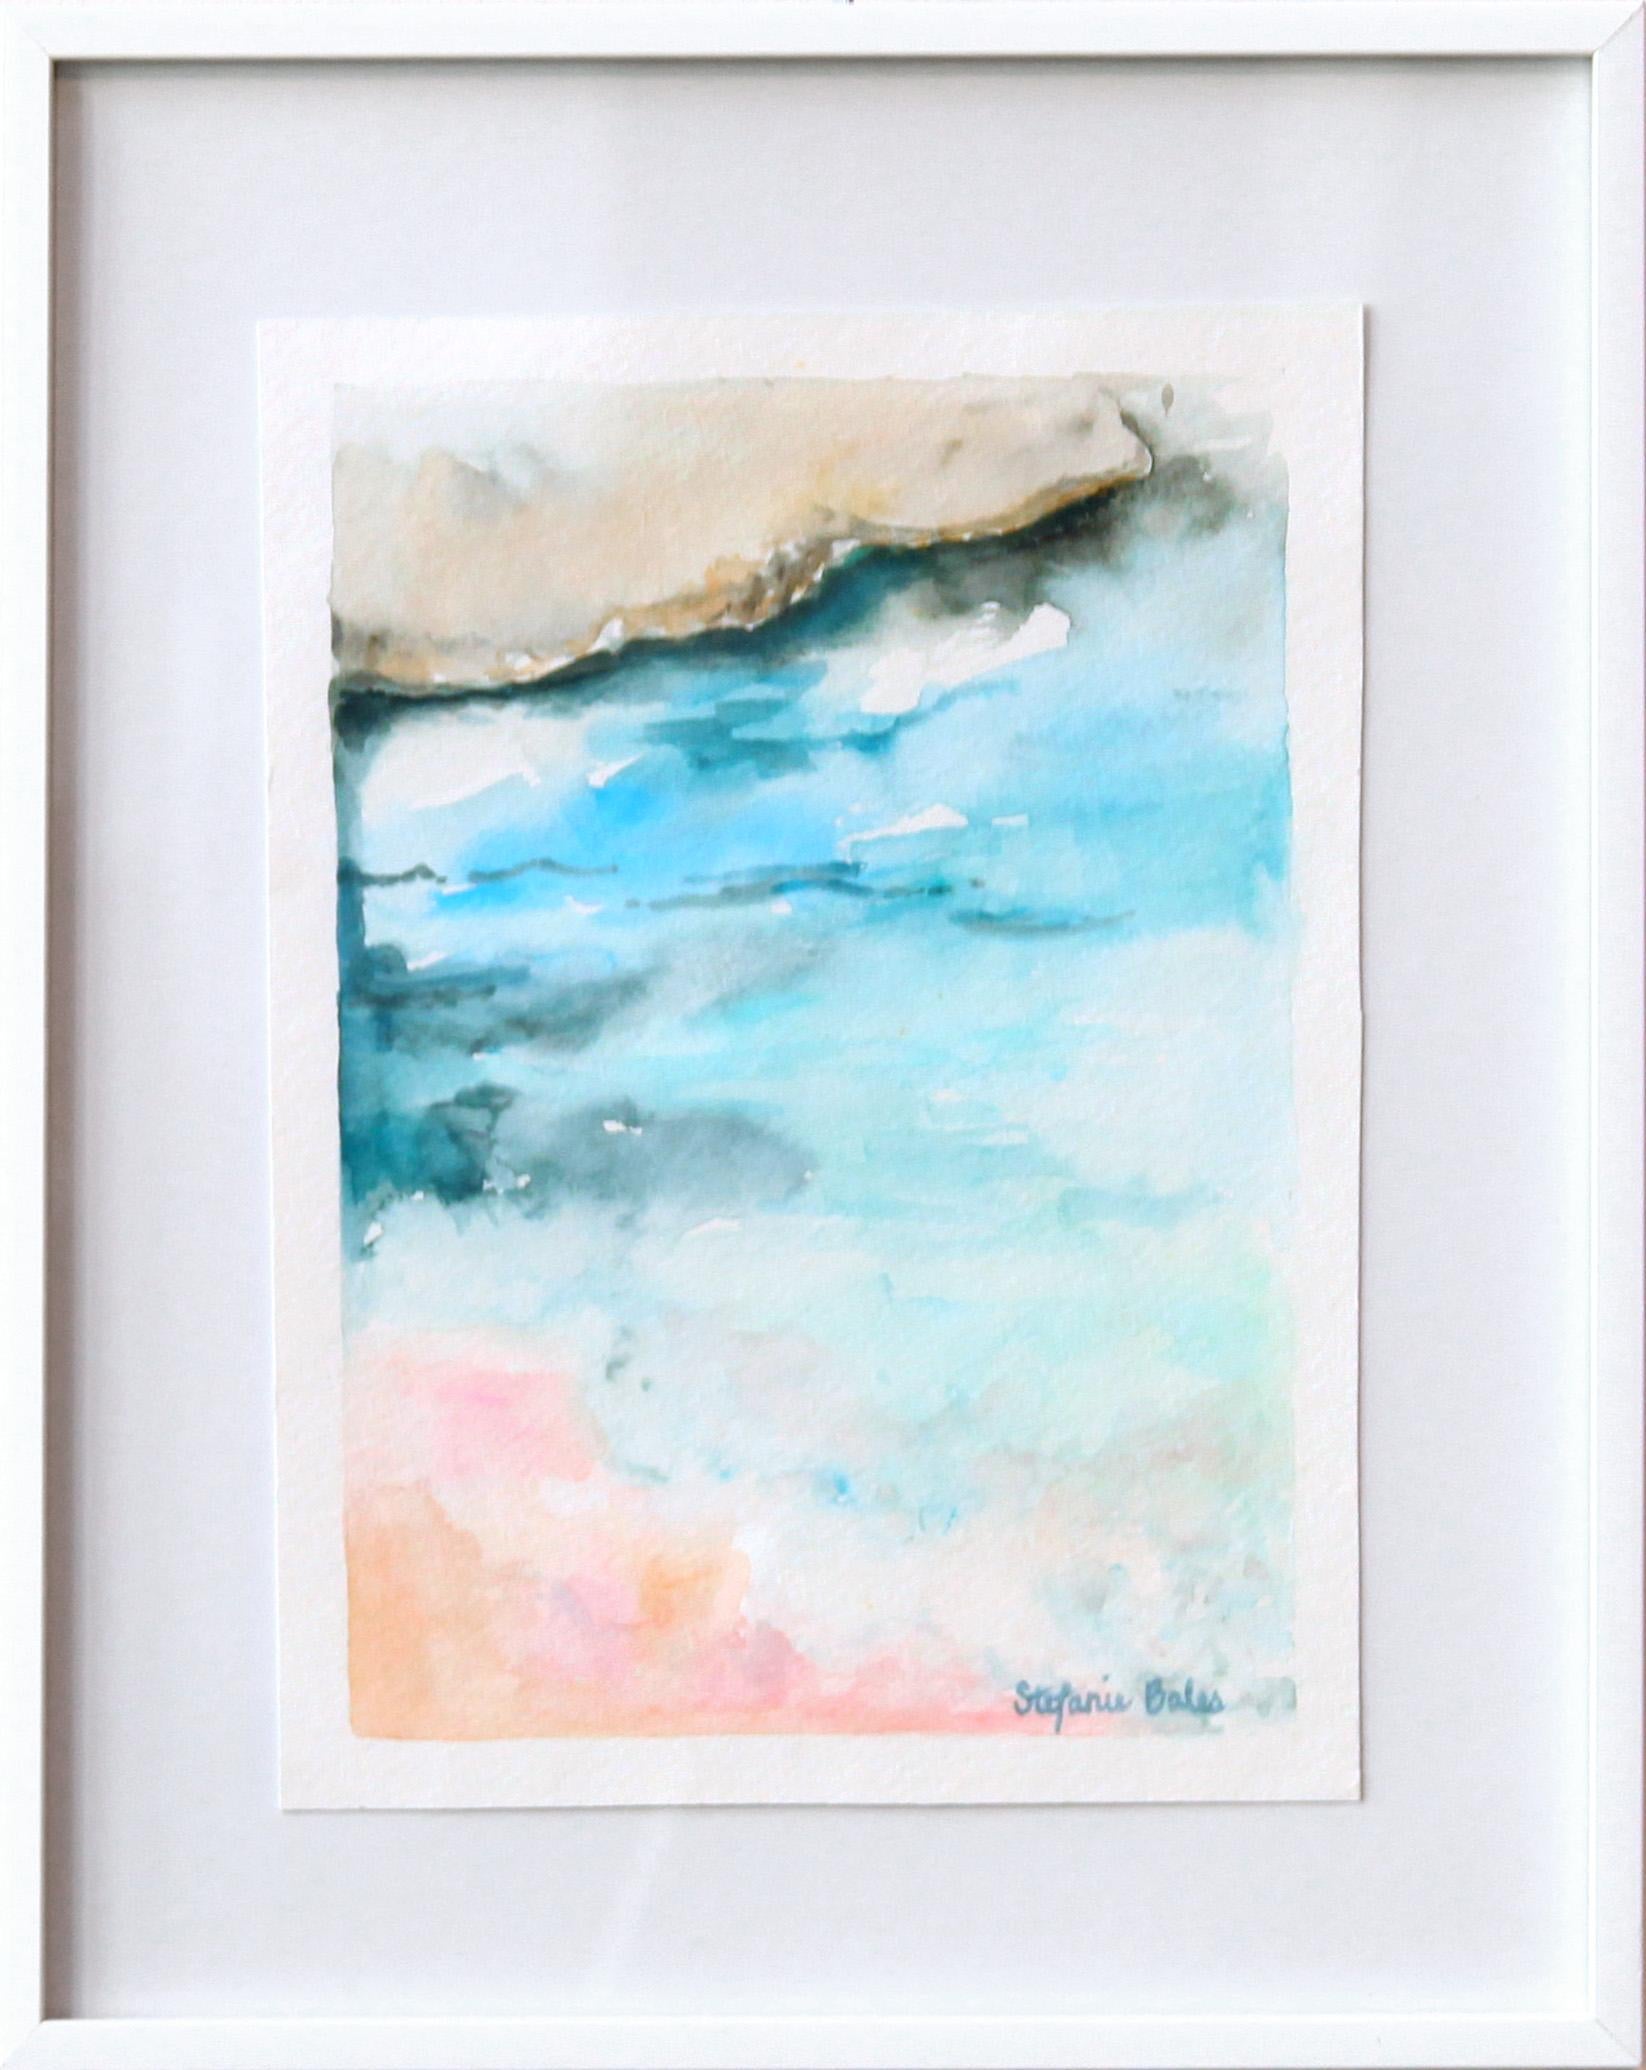 Stefanie Bales Abstract Drawing - An Abstract Impressionist Watercolor on Paper Landscape Painting, "Sea Dreams"